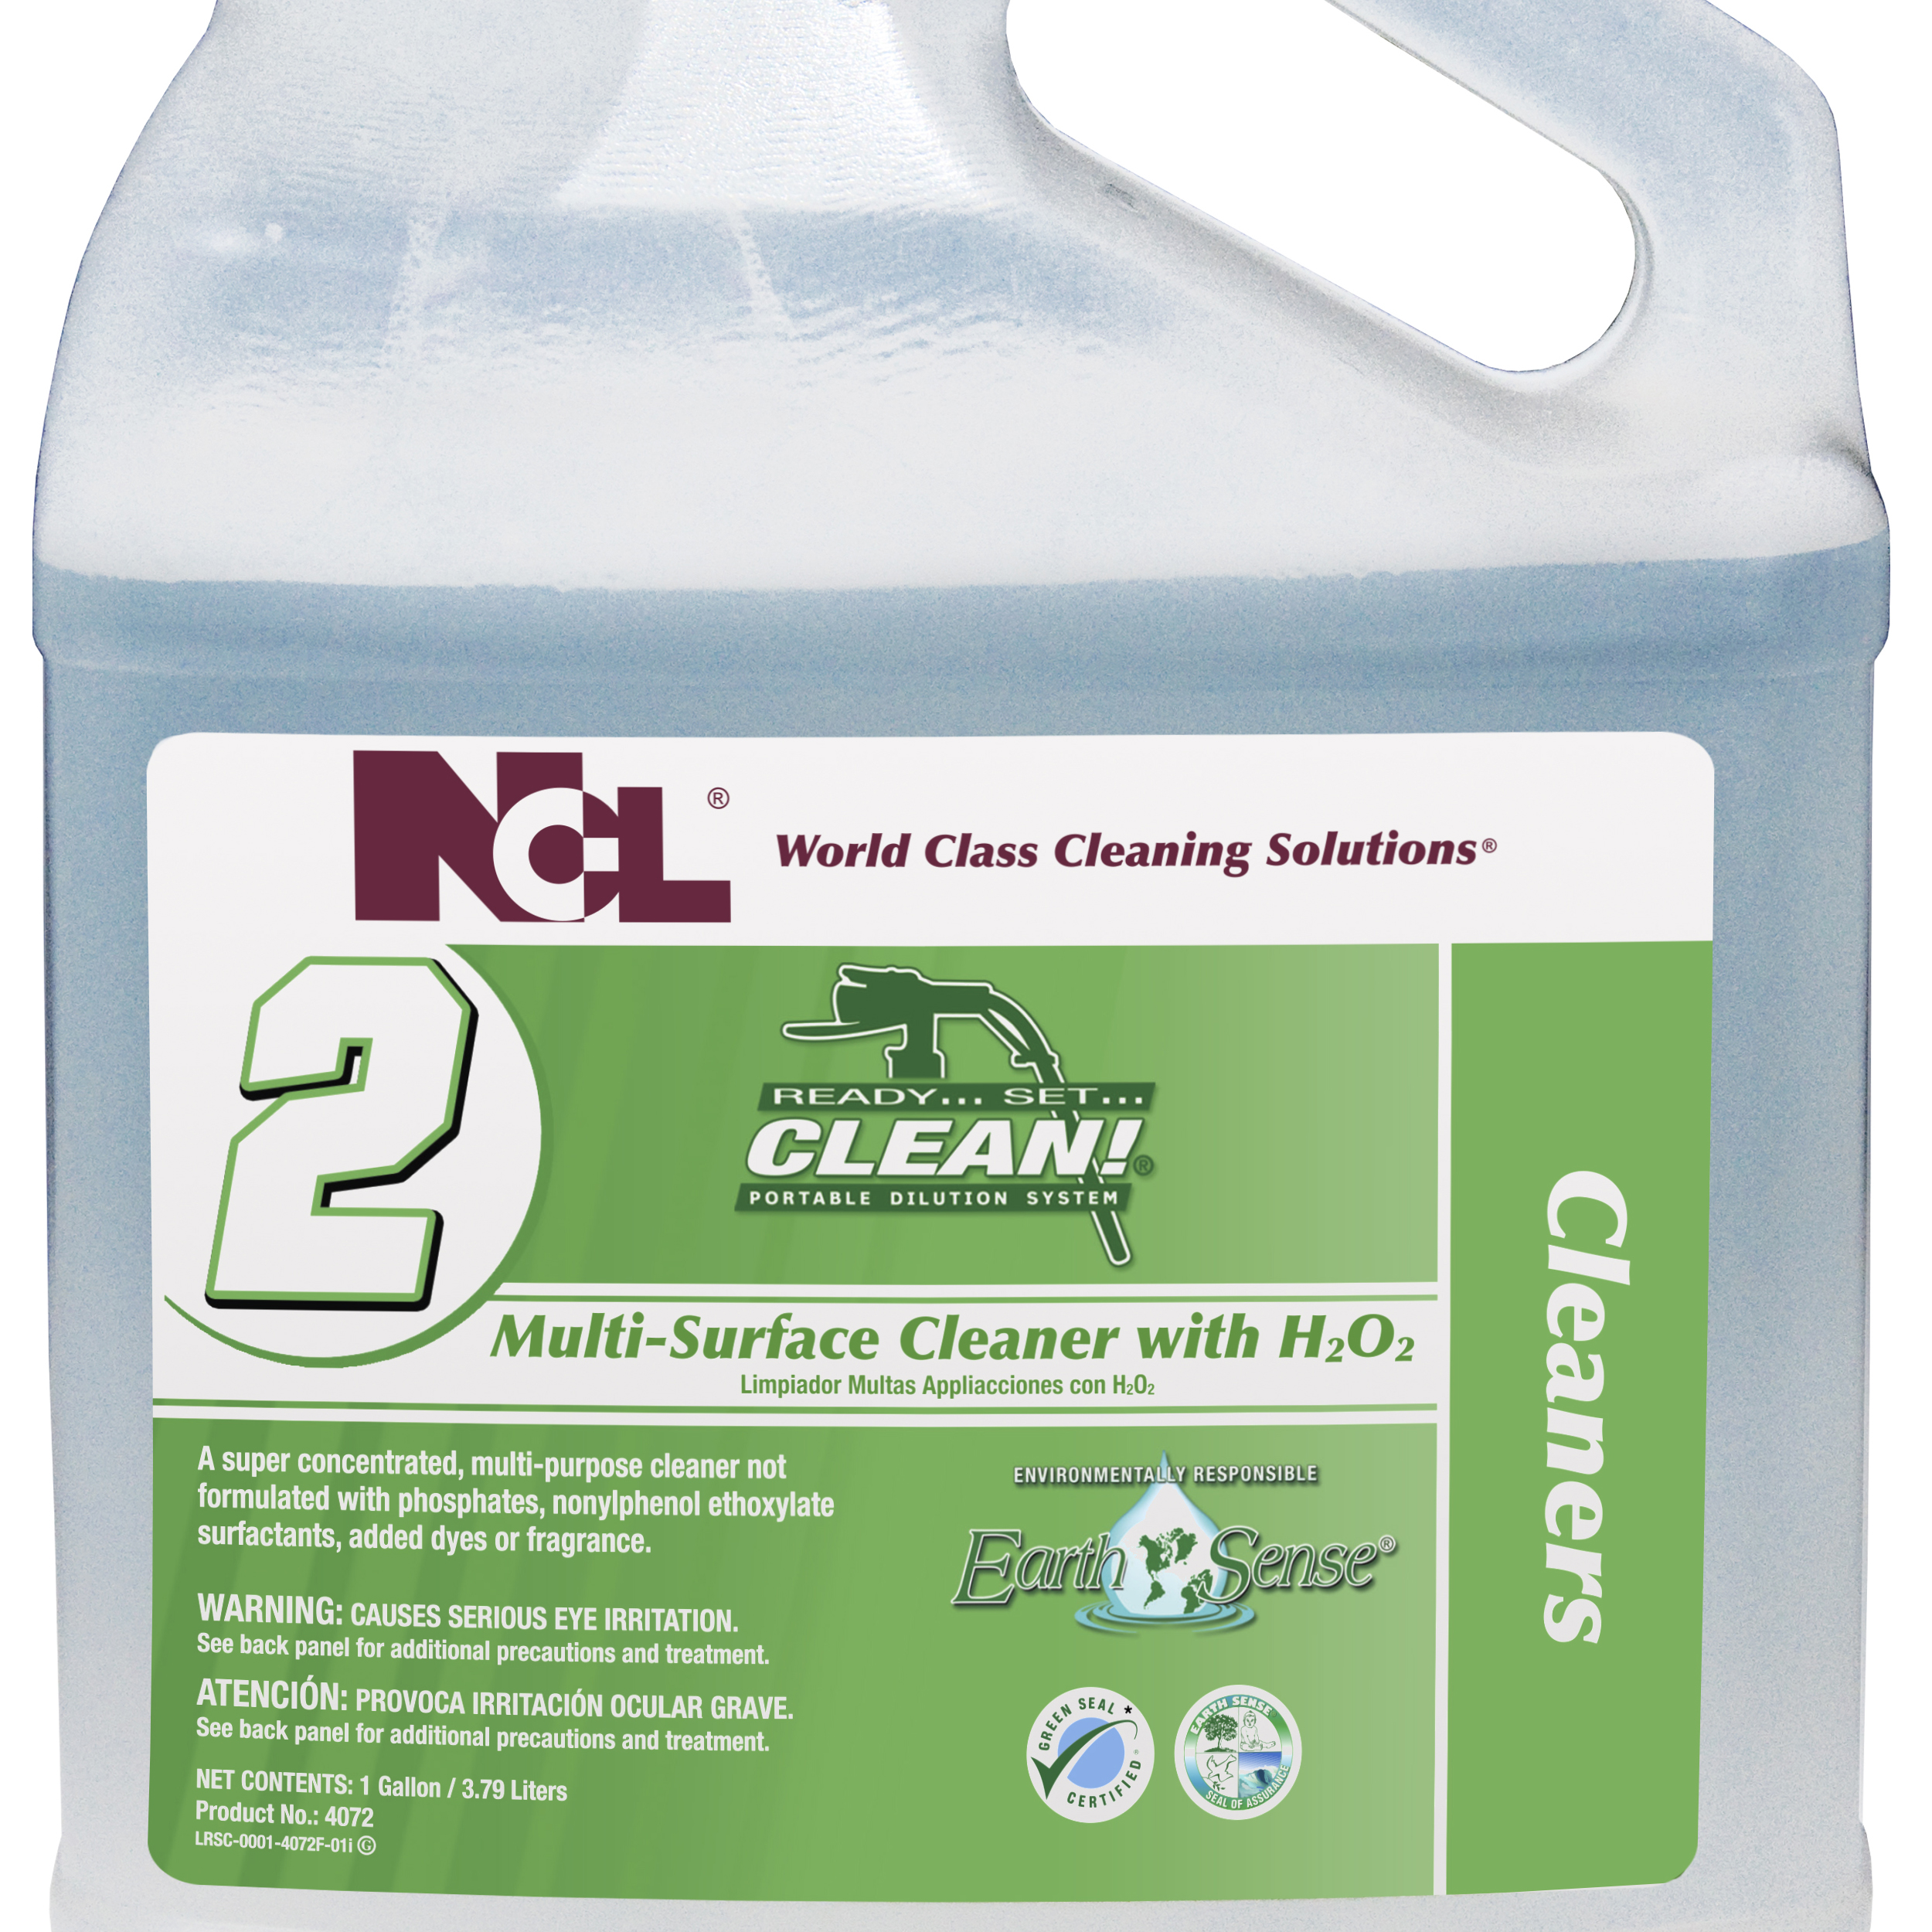  RSC #2 Earth Sense Multi-Surface Cleaner with H2O2 Super Concentrate 4/1 RSC Gal. Case (NCL4072-35) 